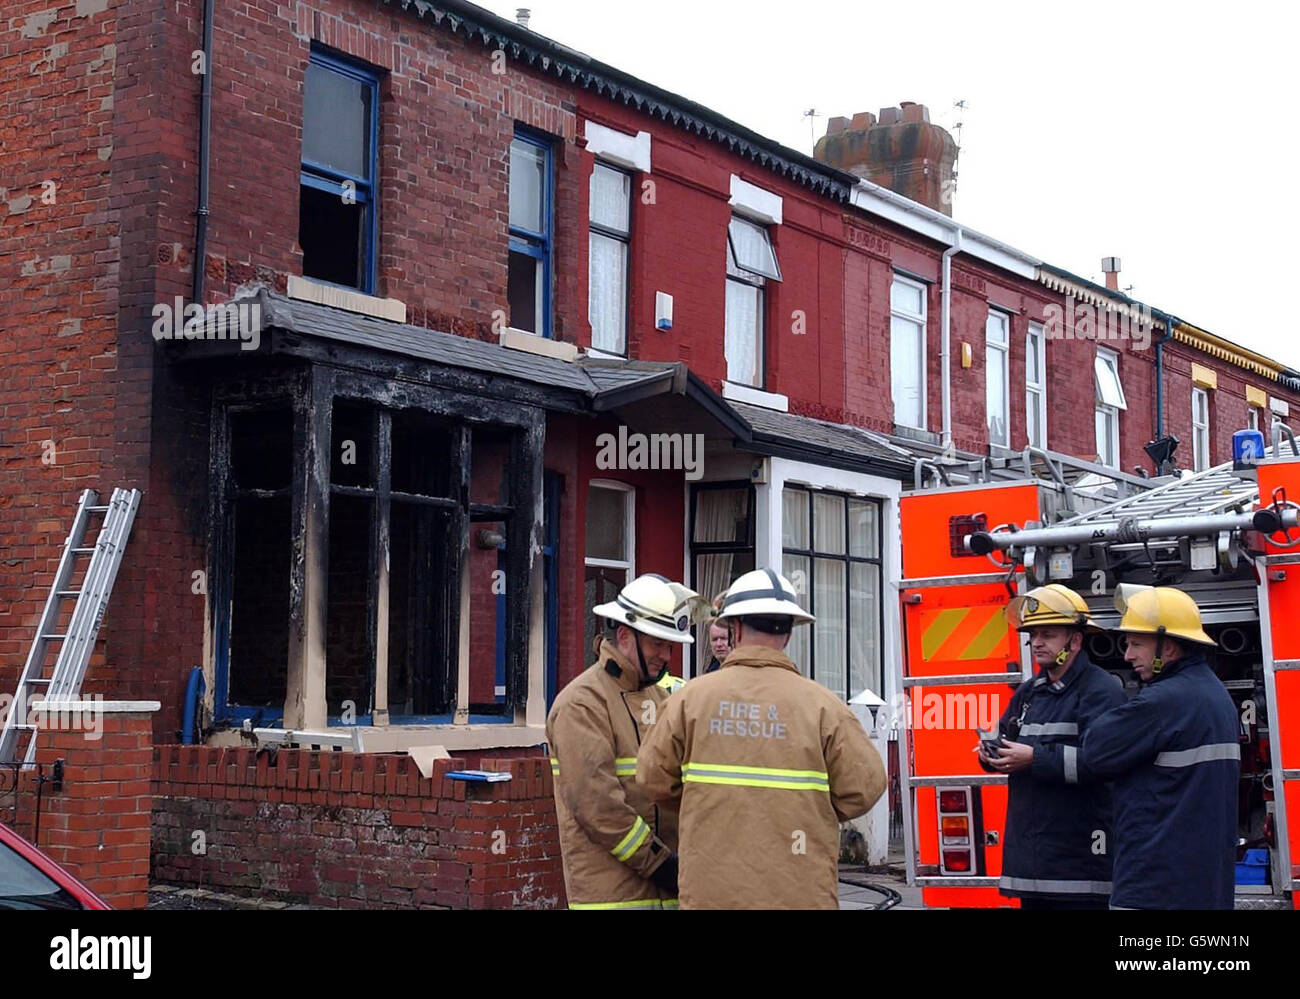 Fire service personnel at the scene of a house fire in Blackpool, Lancashire, where three young children died. Emergency services called at 0435 found the corner house, situated two streets behind the Hilton Hotel on town's north shore, well ablaze. * A spokesman for the Lancashire Constabulary said it was believed there were seven children, their mother, father and grandmother trapped inside the house. They were taken to Blackpool Victoria Hospital where three of the children were pronounced dead on arrival. Stock Photo